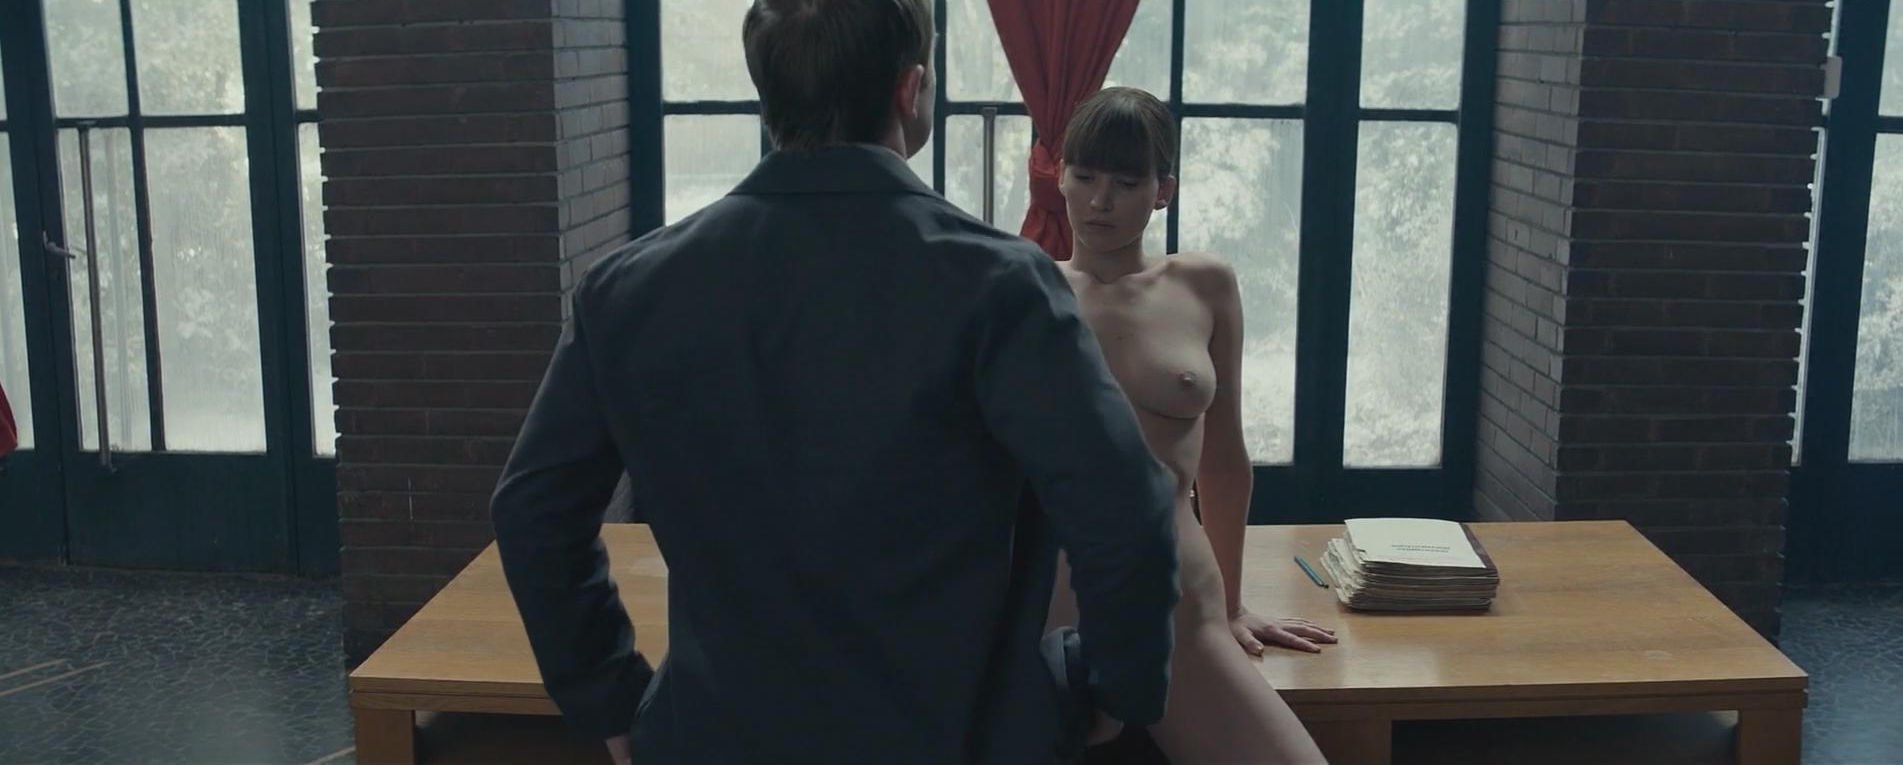 Jennifer Lawrence Nude Red Sparrow 2018 Hd 1080p Thefappening 